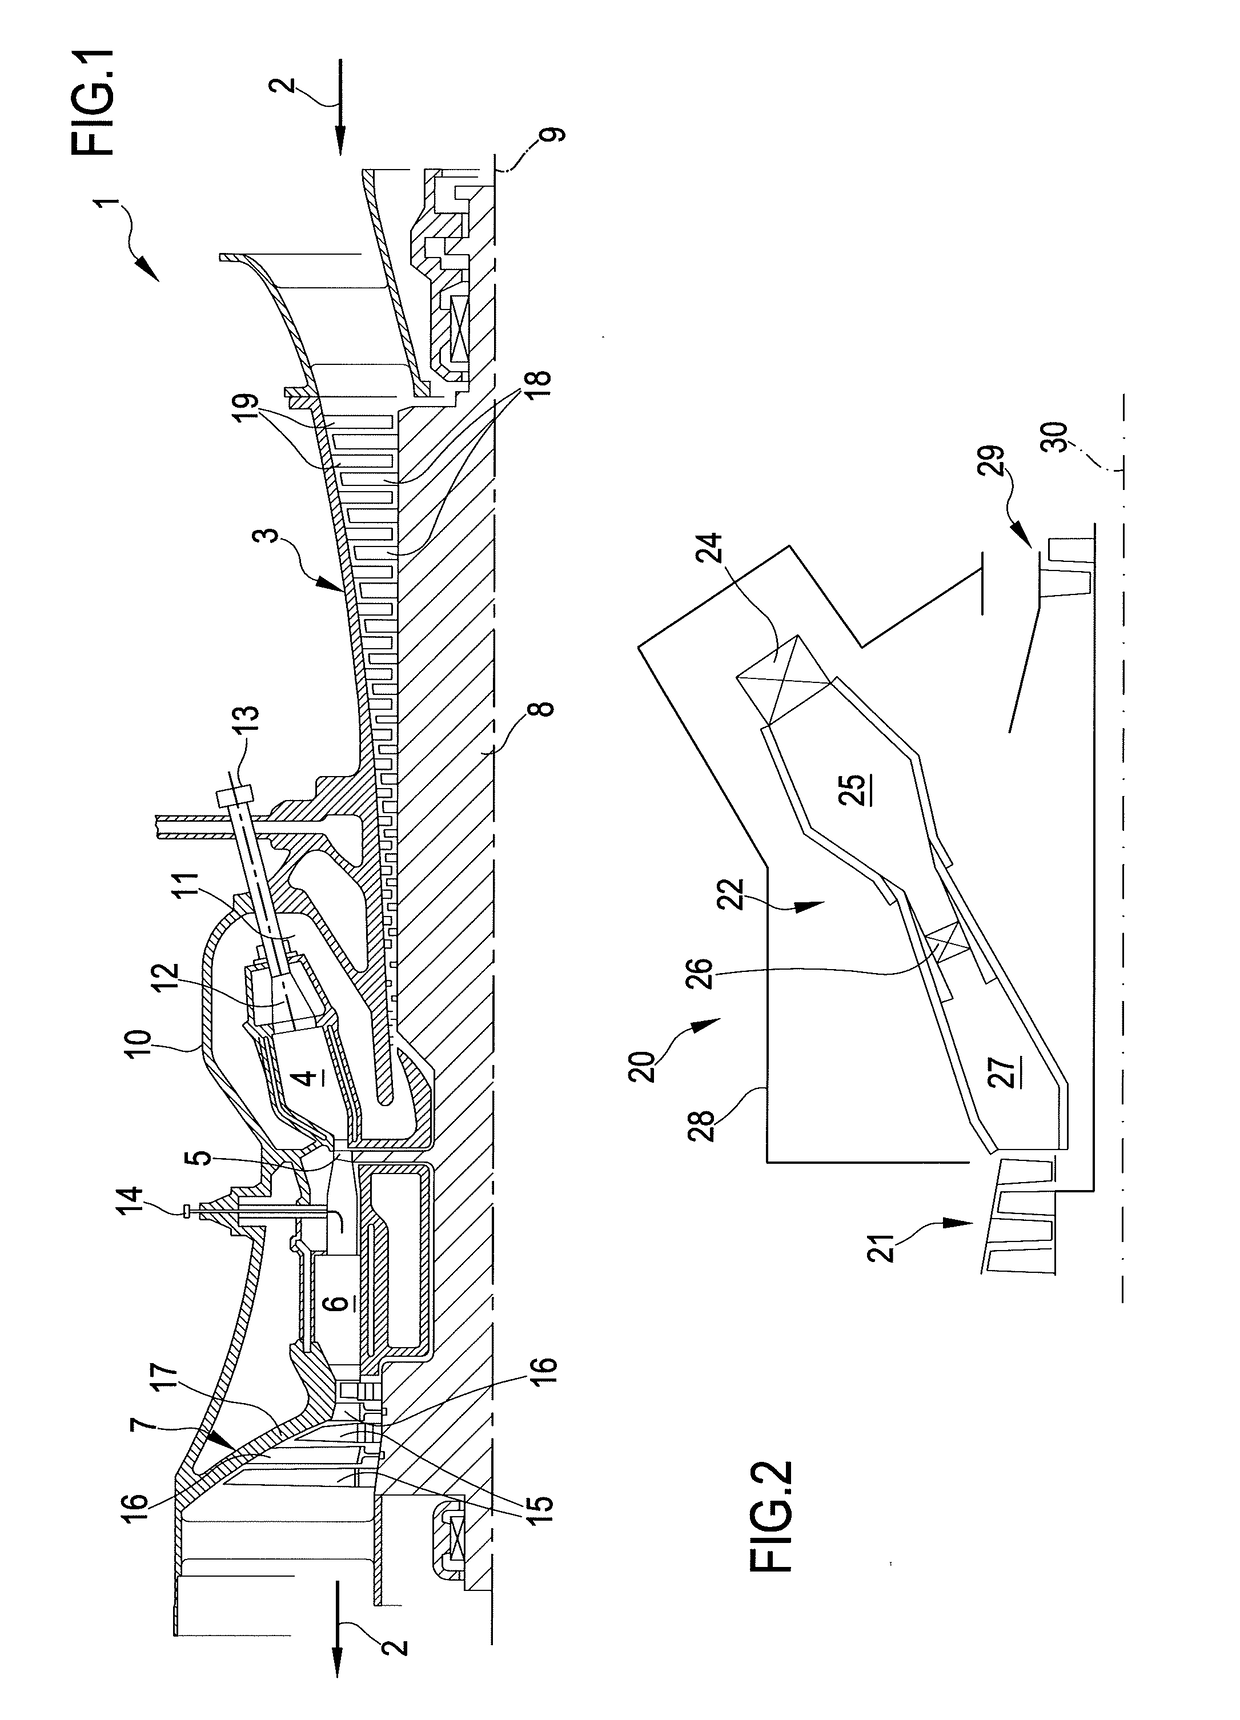 Method for operating a supply assembly for supplying fuel gas and inert media to a gas turbine combustor, such supply assembly and a gas turbine comprising such supply assembly